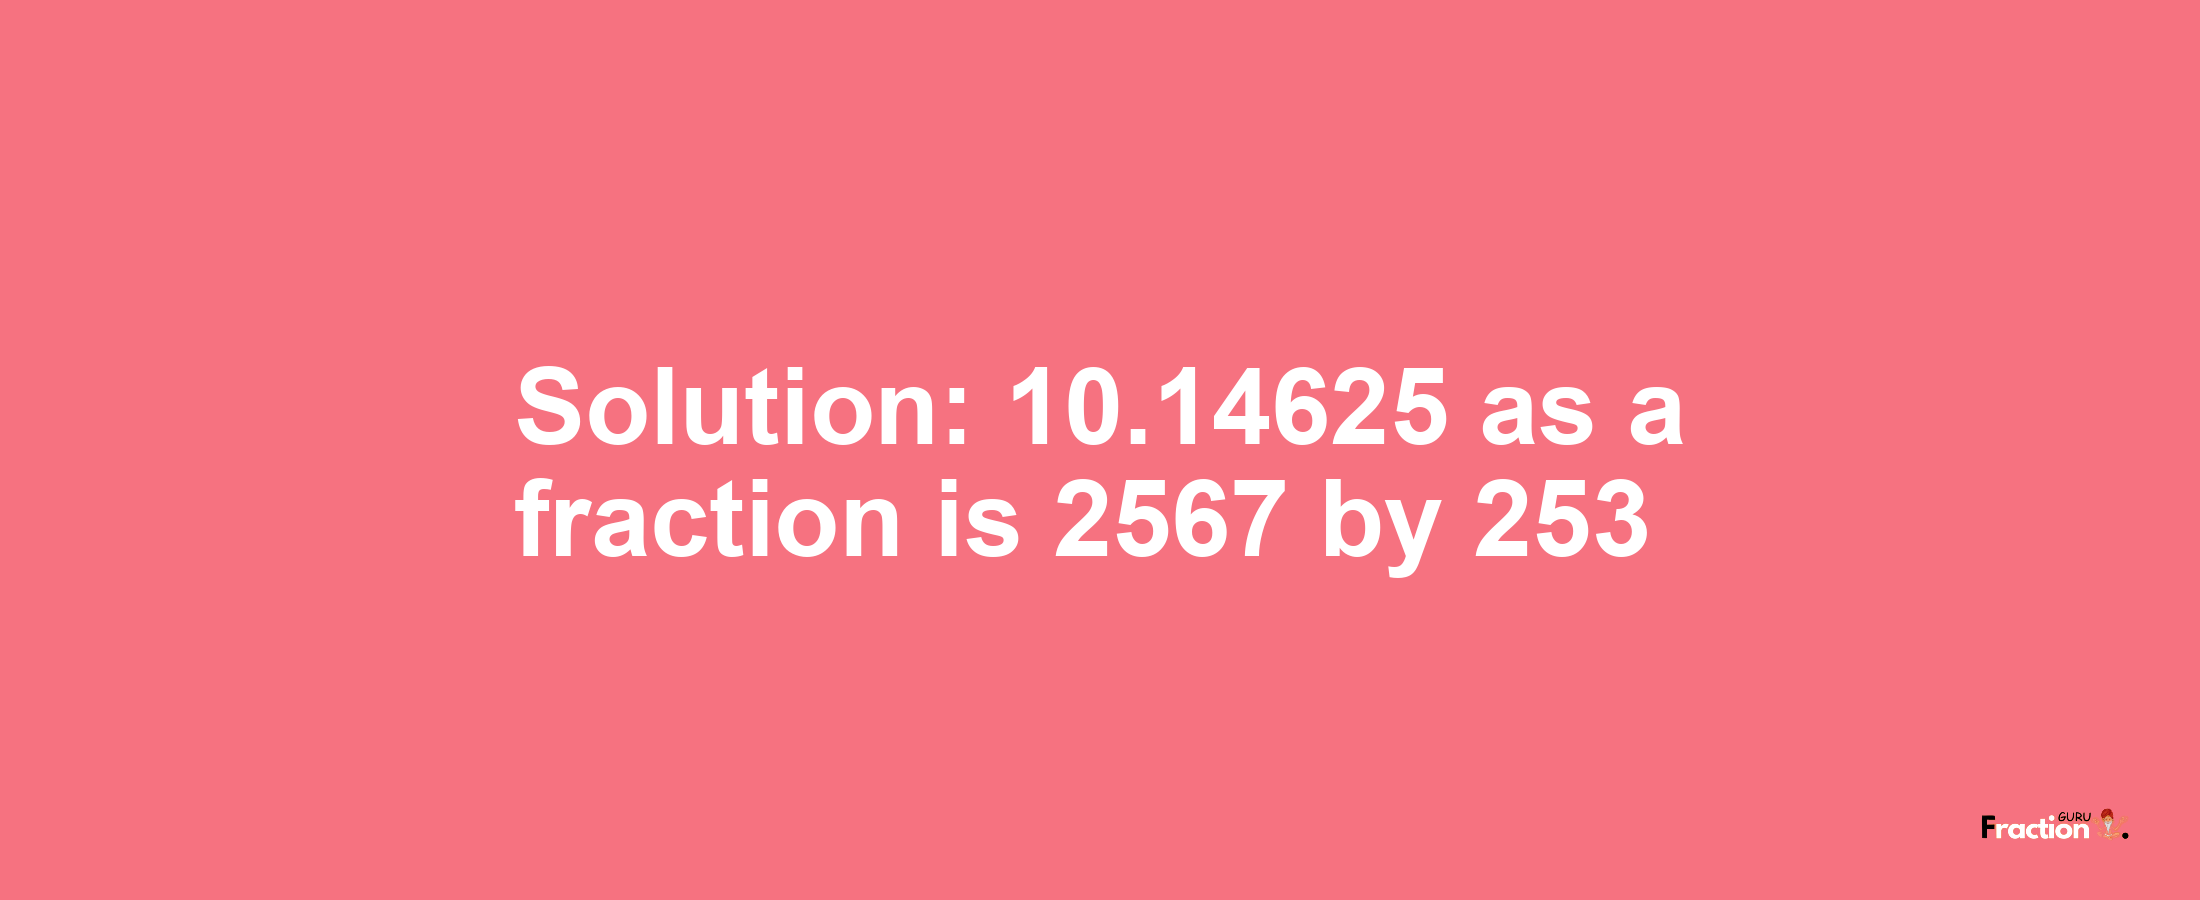 Solution:10.14625 as a fraction is 2567/253